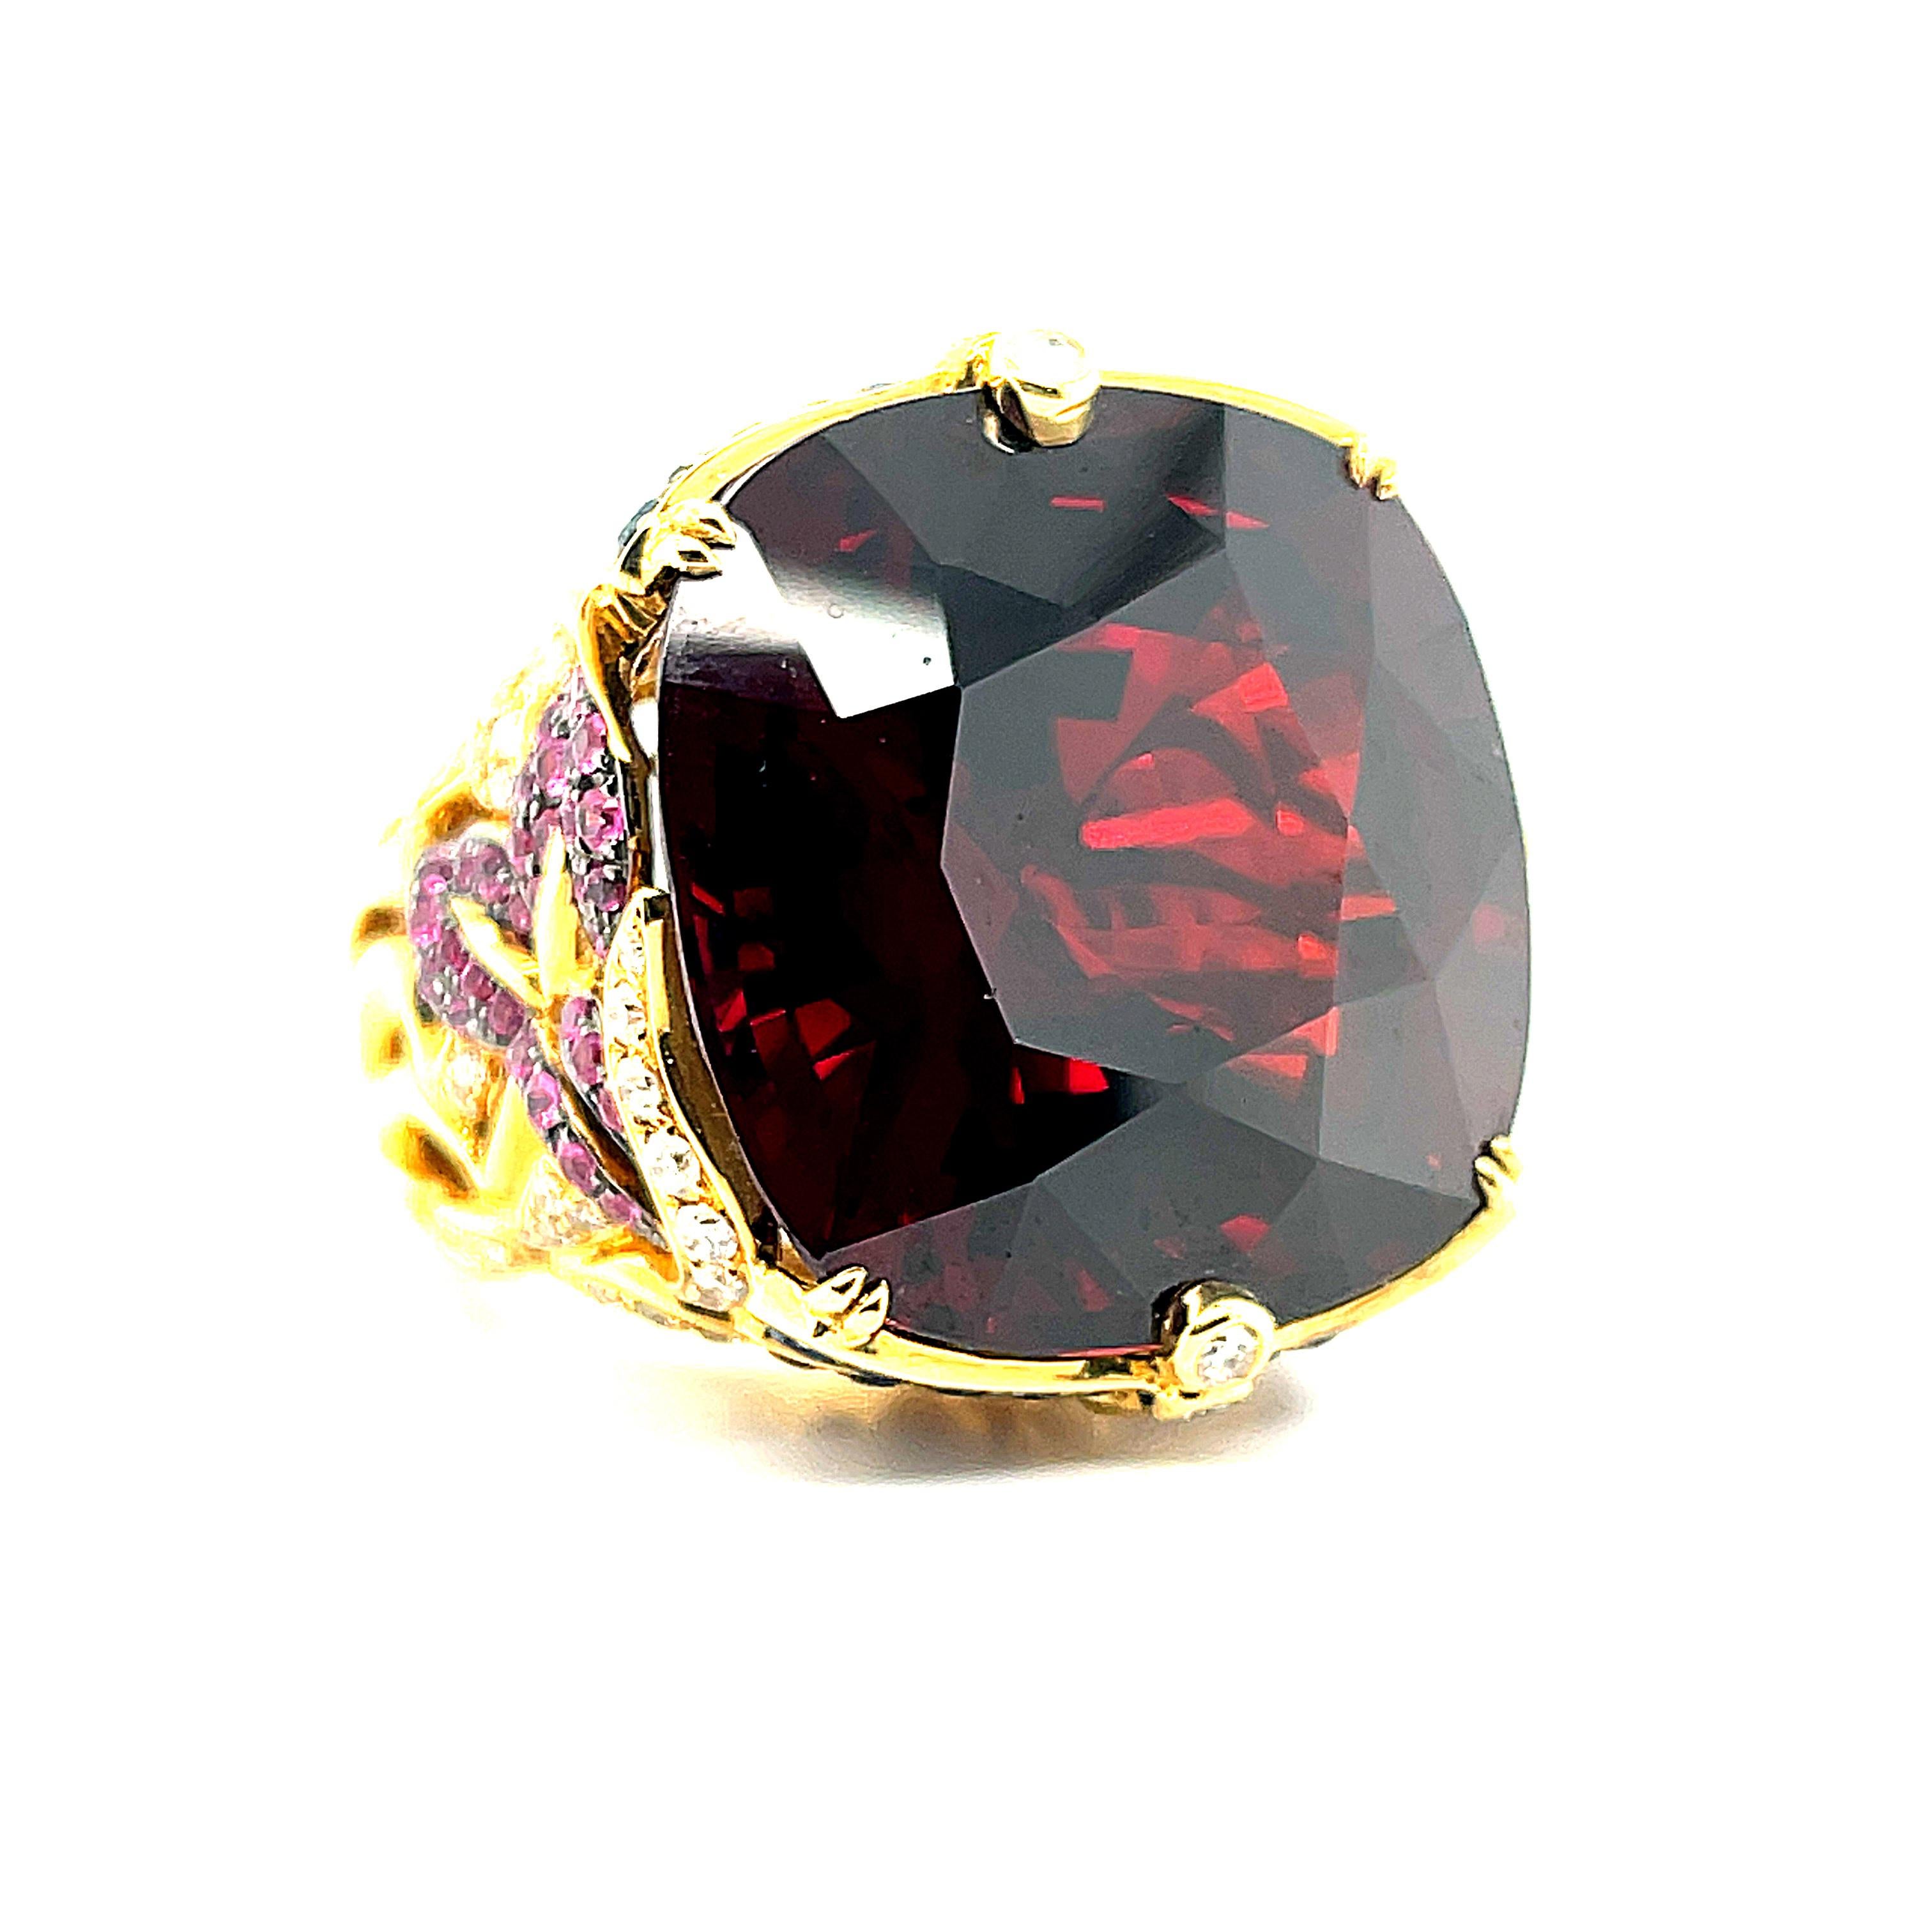 This impressive statement ring is set with an enormous cushion-cut Mozambique red garnet that weighs a whopping 71.87 carats! The garnet is a beautifully crystalline, brilliant gem, with rich, orangy-red color - such unusual and superior quality in